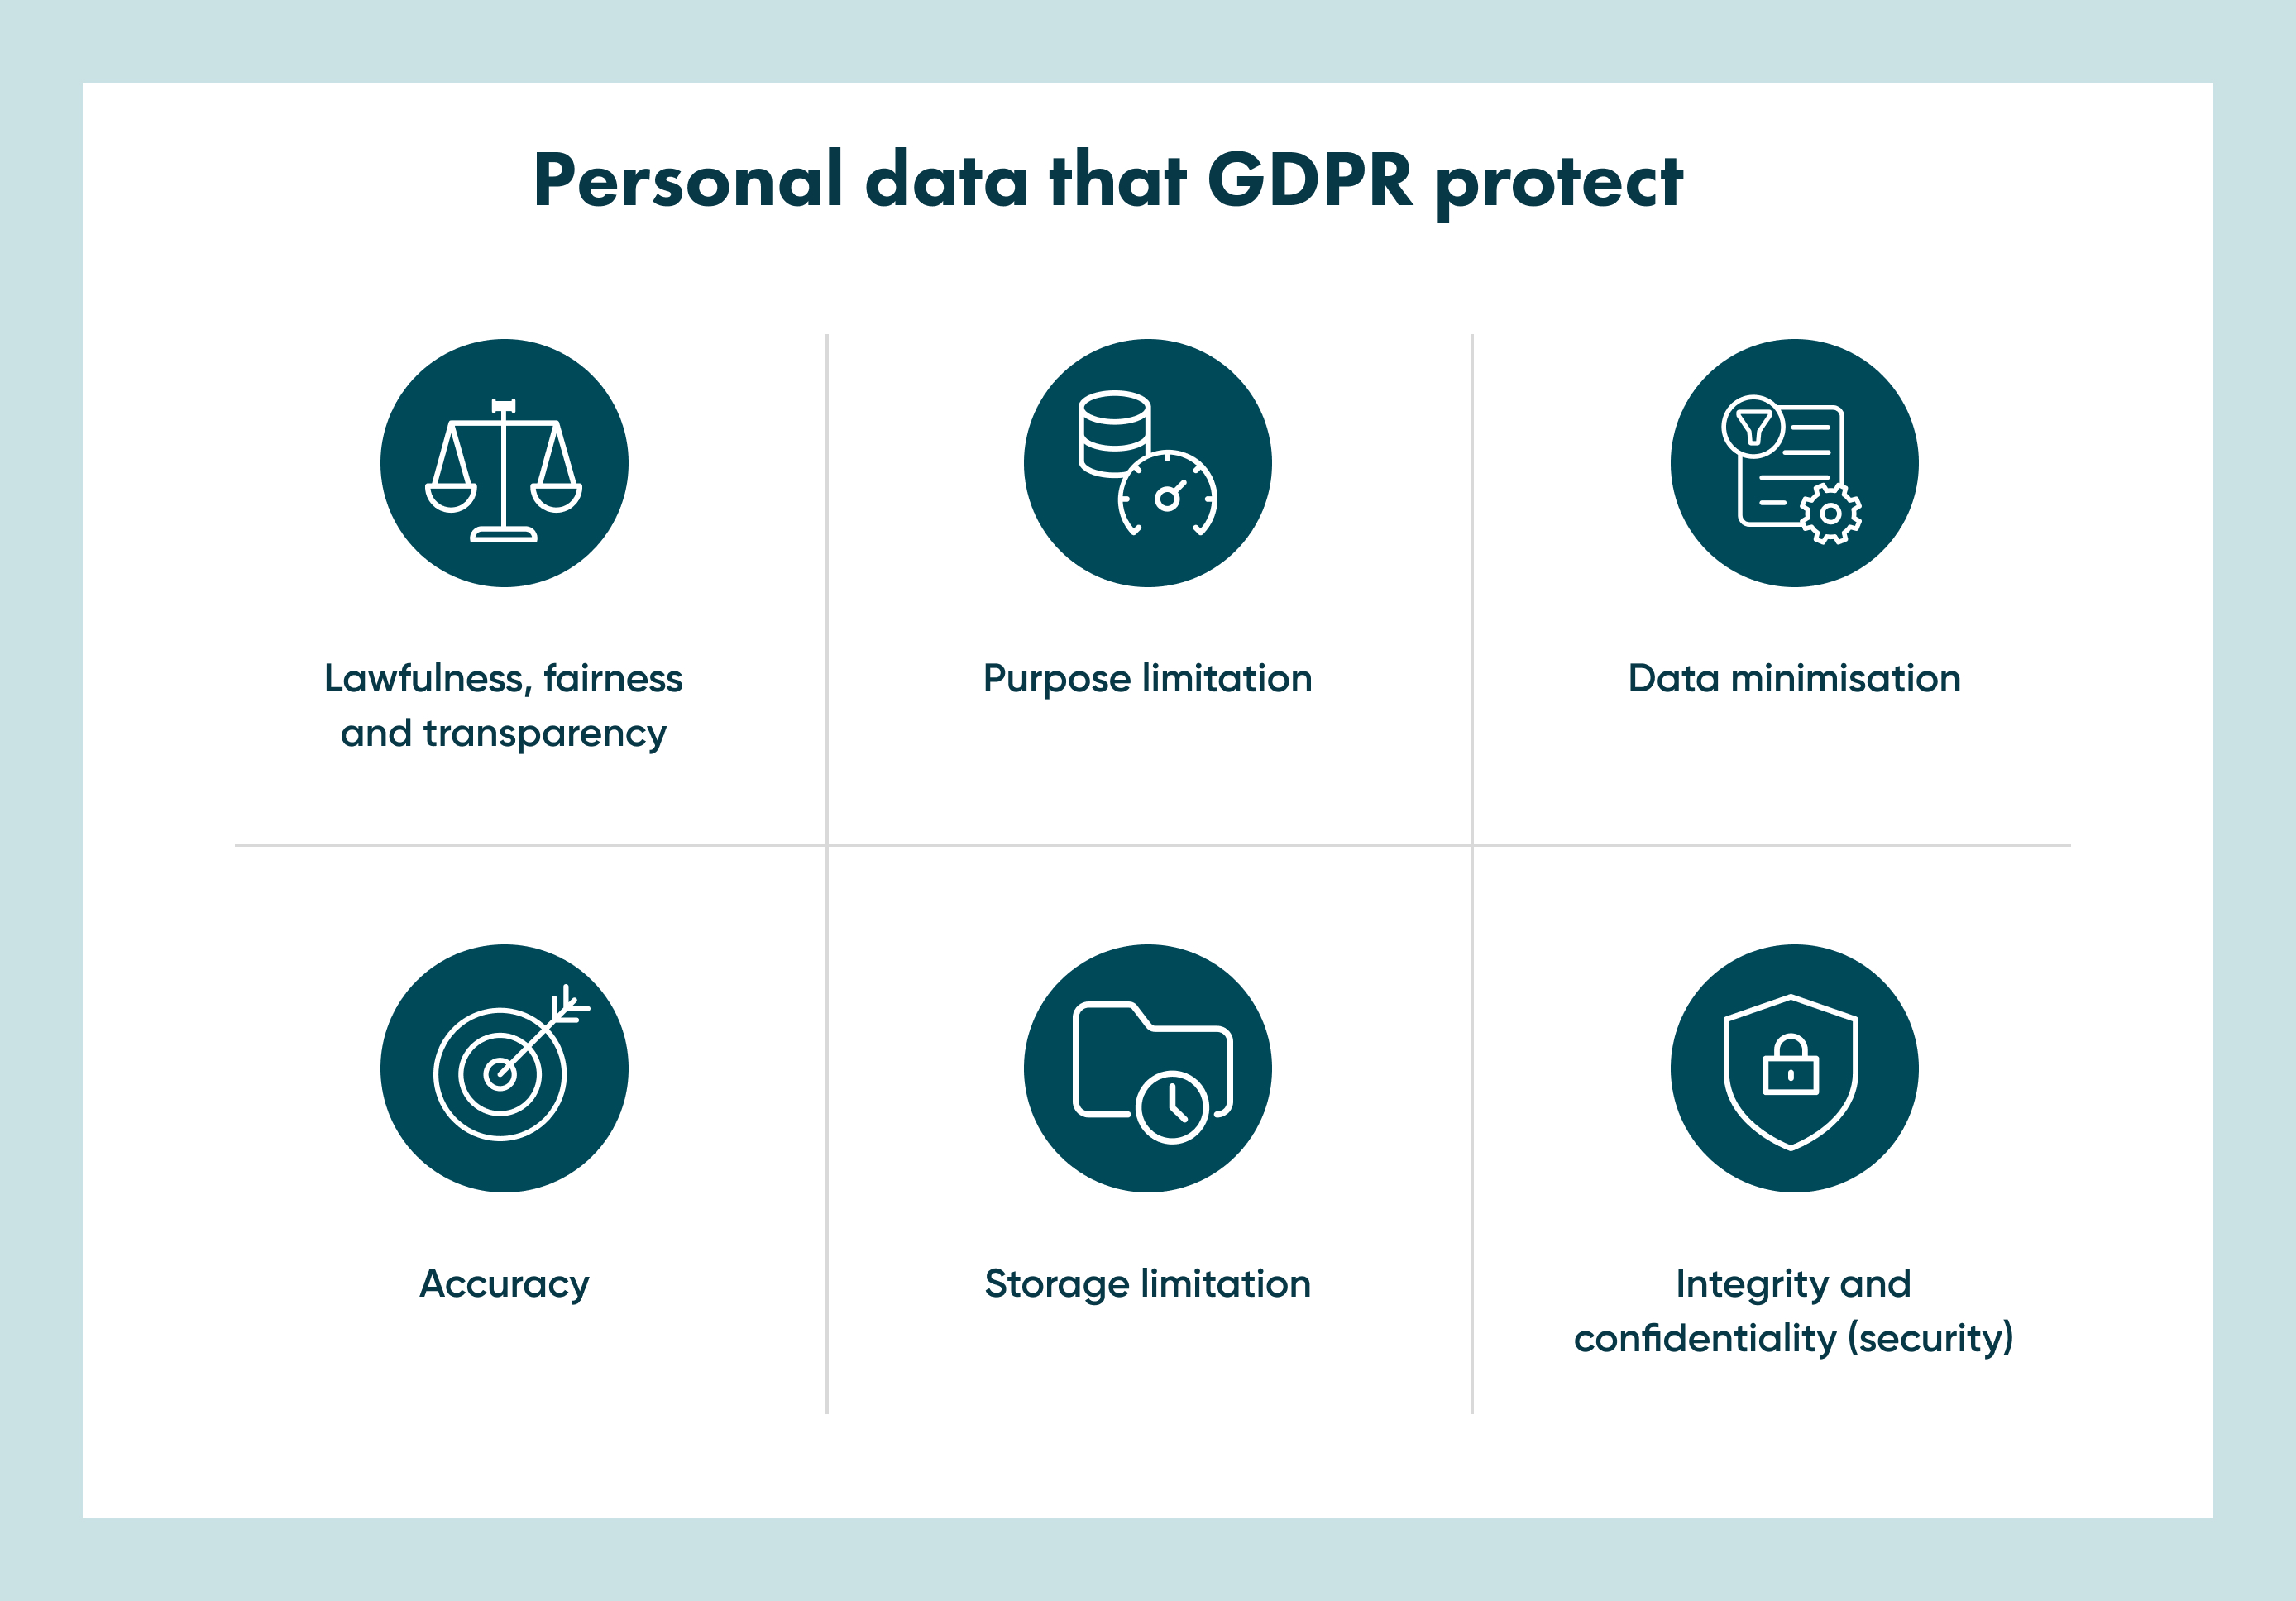 According to Data Protection Act, the six principles of GDPR are lawfulness, purpose limitation, data minimisation, accuracy, storage limitation, integrity, and confidentiality.